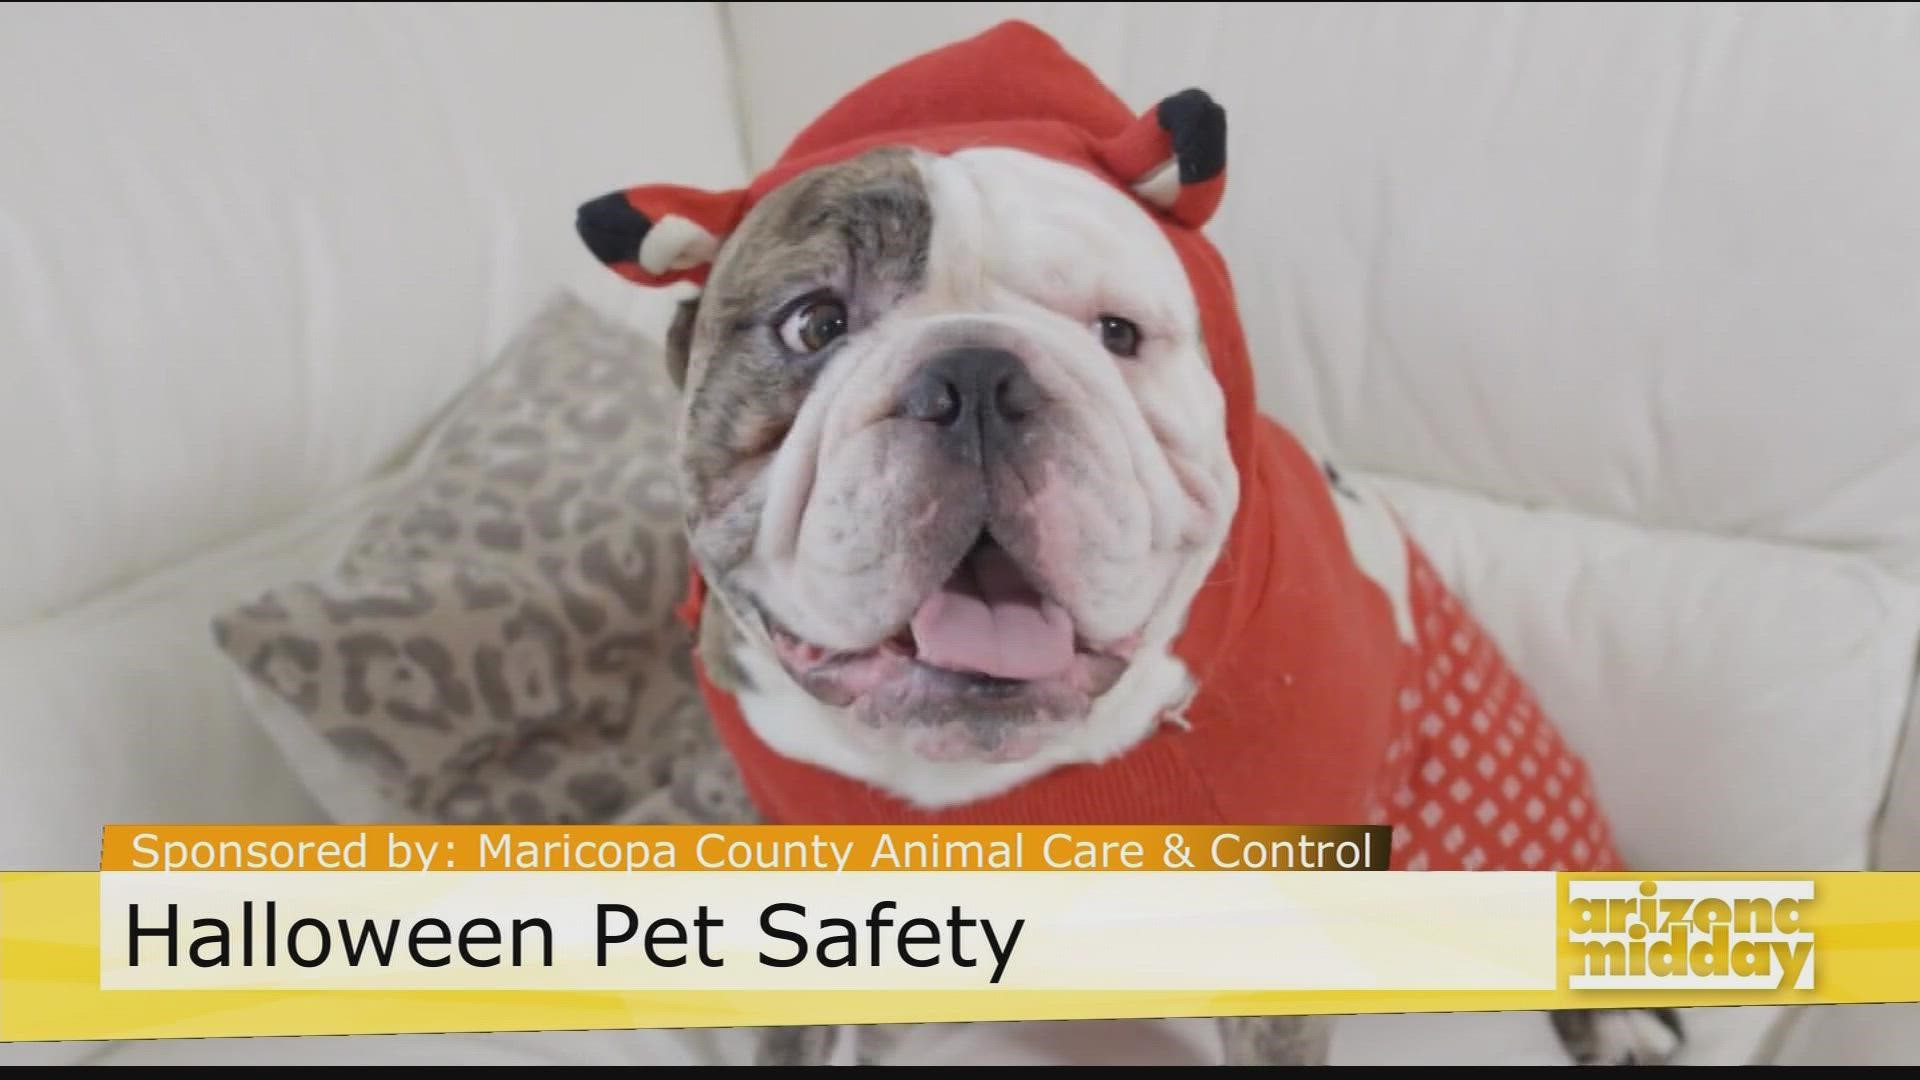 Halloween is this weekend and Monica Gery with Maricopa County Animal Care & Control has tips to make sure your pets stay safe!